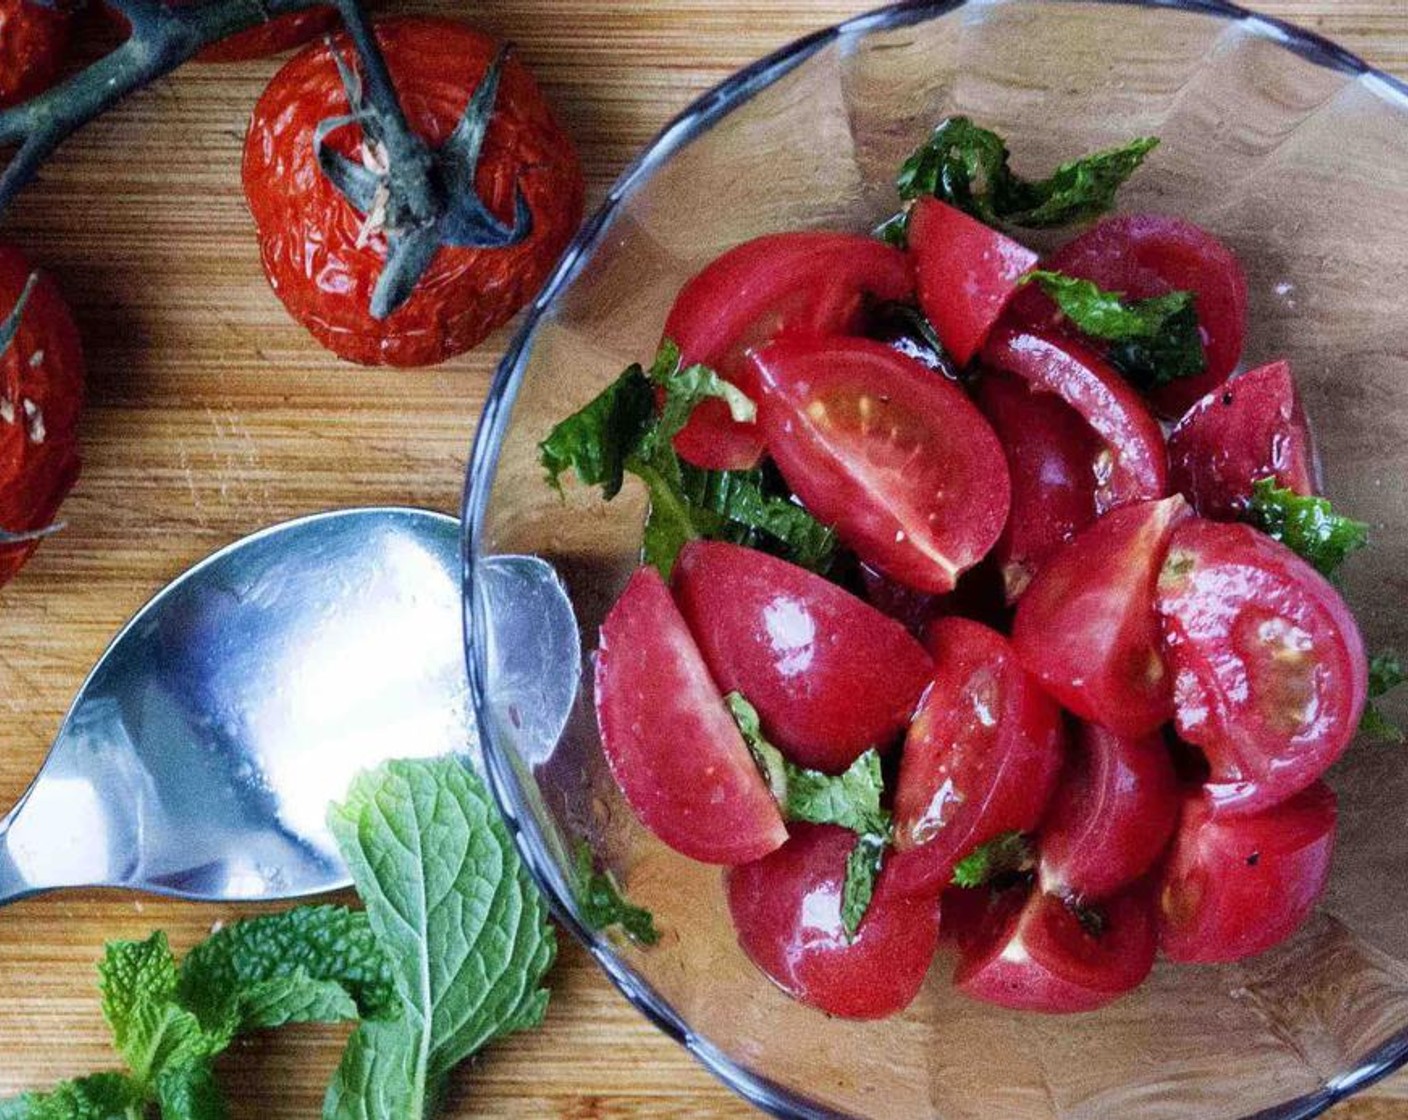 step 4 In a bowl, toss Heirloom Cherry Tomato (1 cup), Fresh Basil (1/4 cup), and Fresh Mint Leaves (3 Tbsp) with Extra-Virgin Olive Oil (2 Tbsp), season with Salt (to taste) and Ground Black Pepper (to taste).